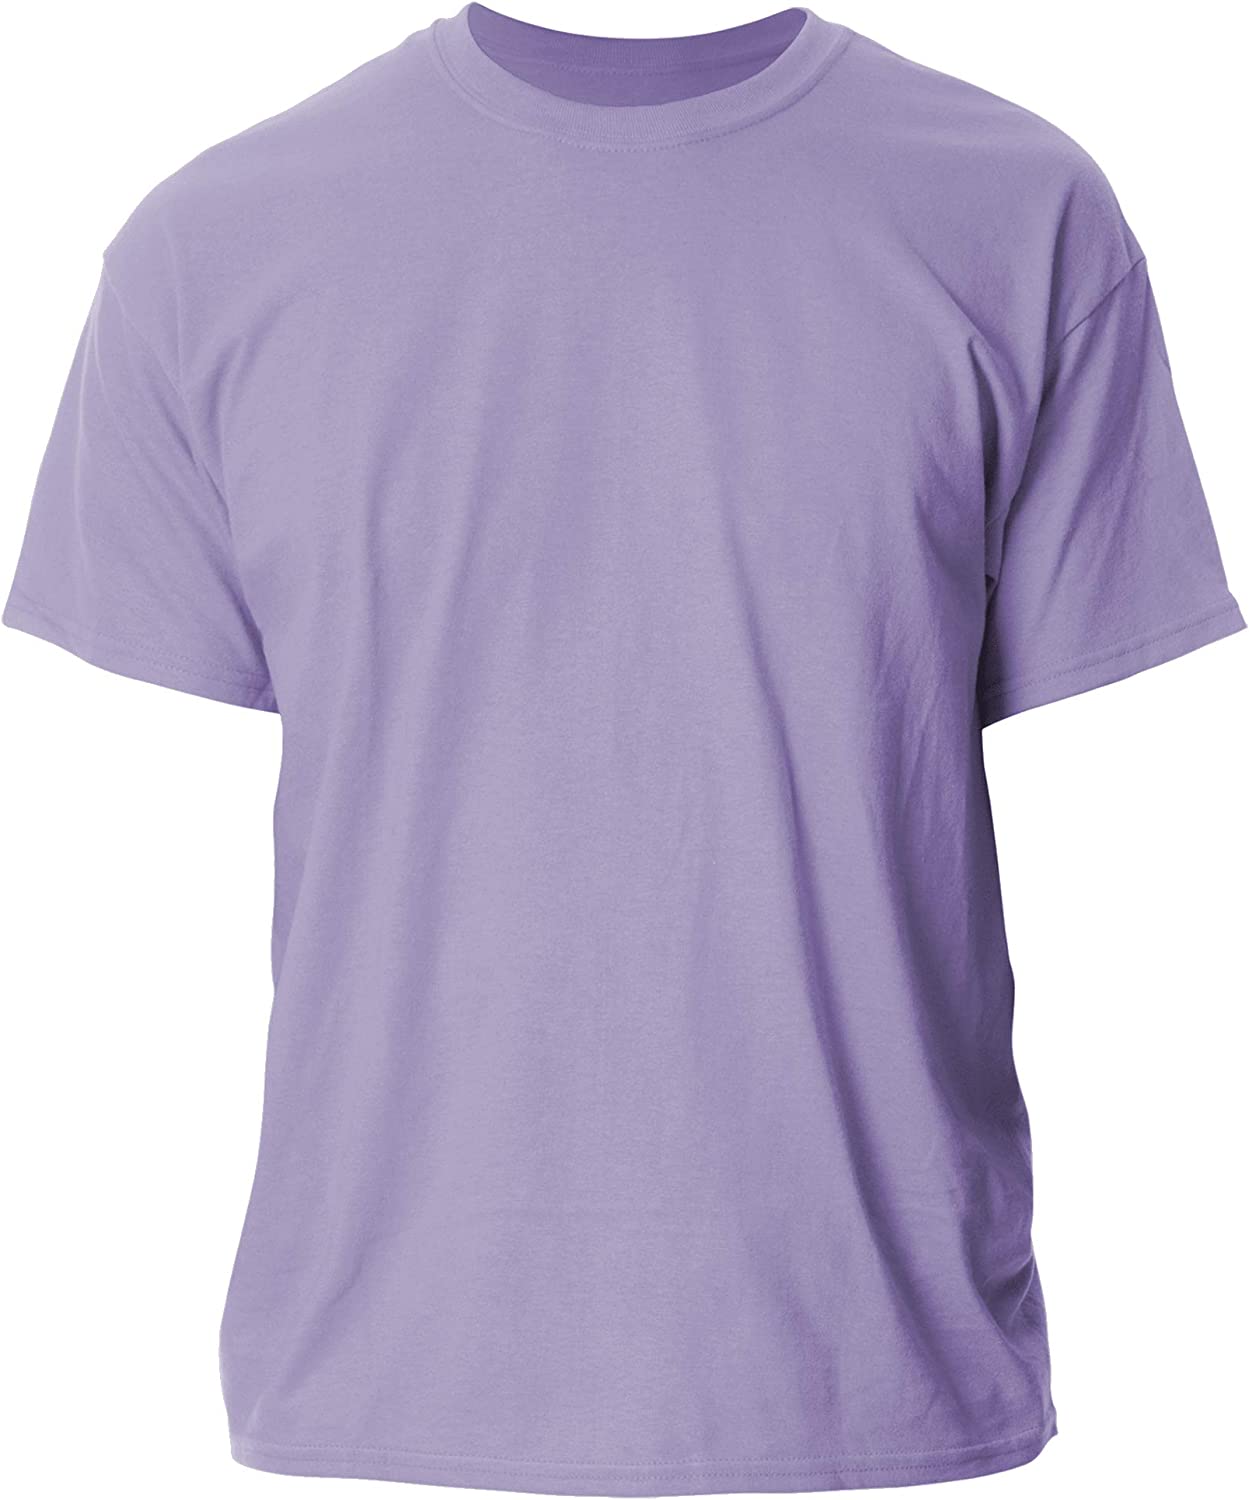 Wholesale Cotton Crew T-Shirts Fit Blank All Colors Available